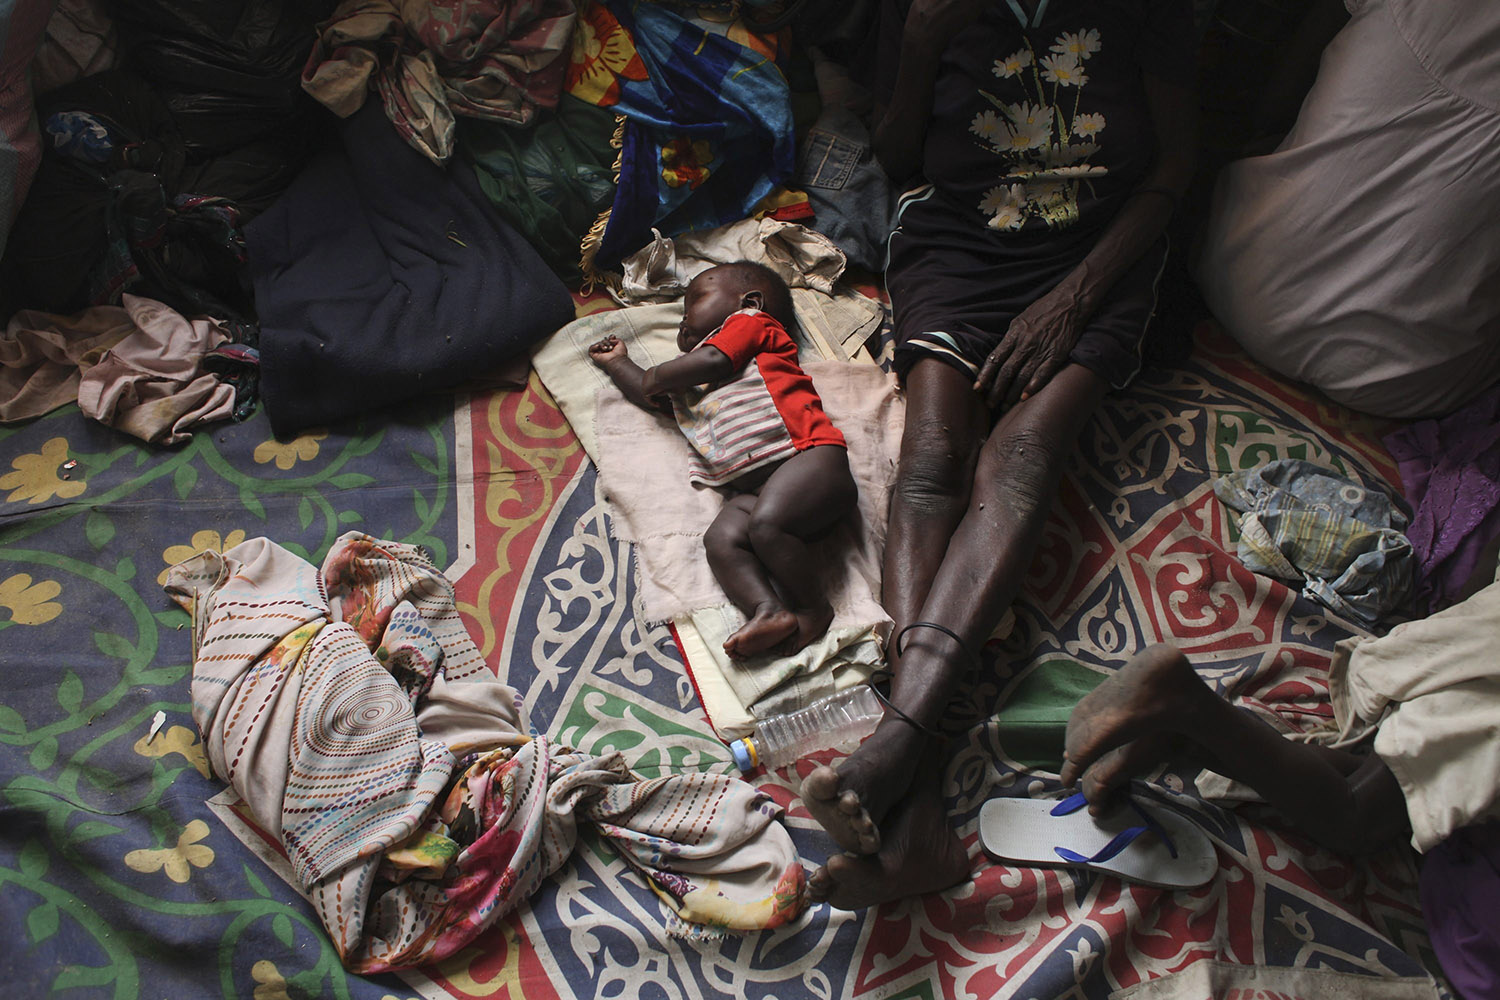 A baby sleeps next to a woman in a Catholic church in Malakal